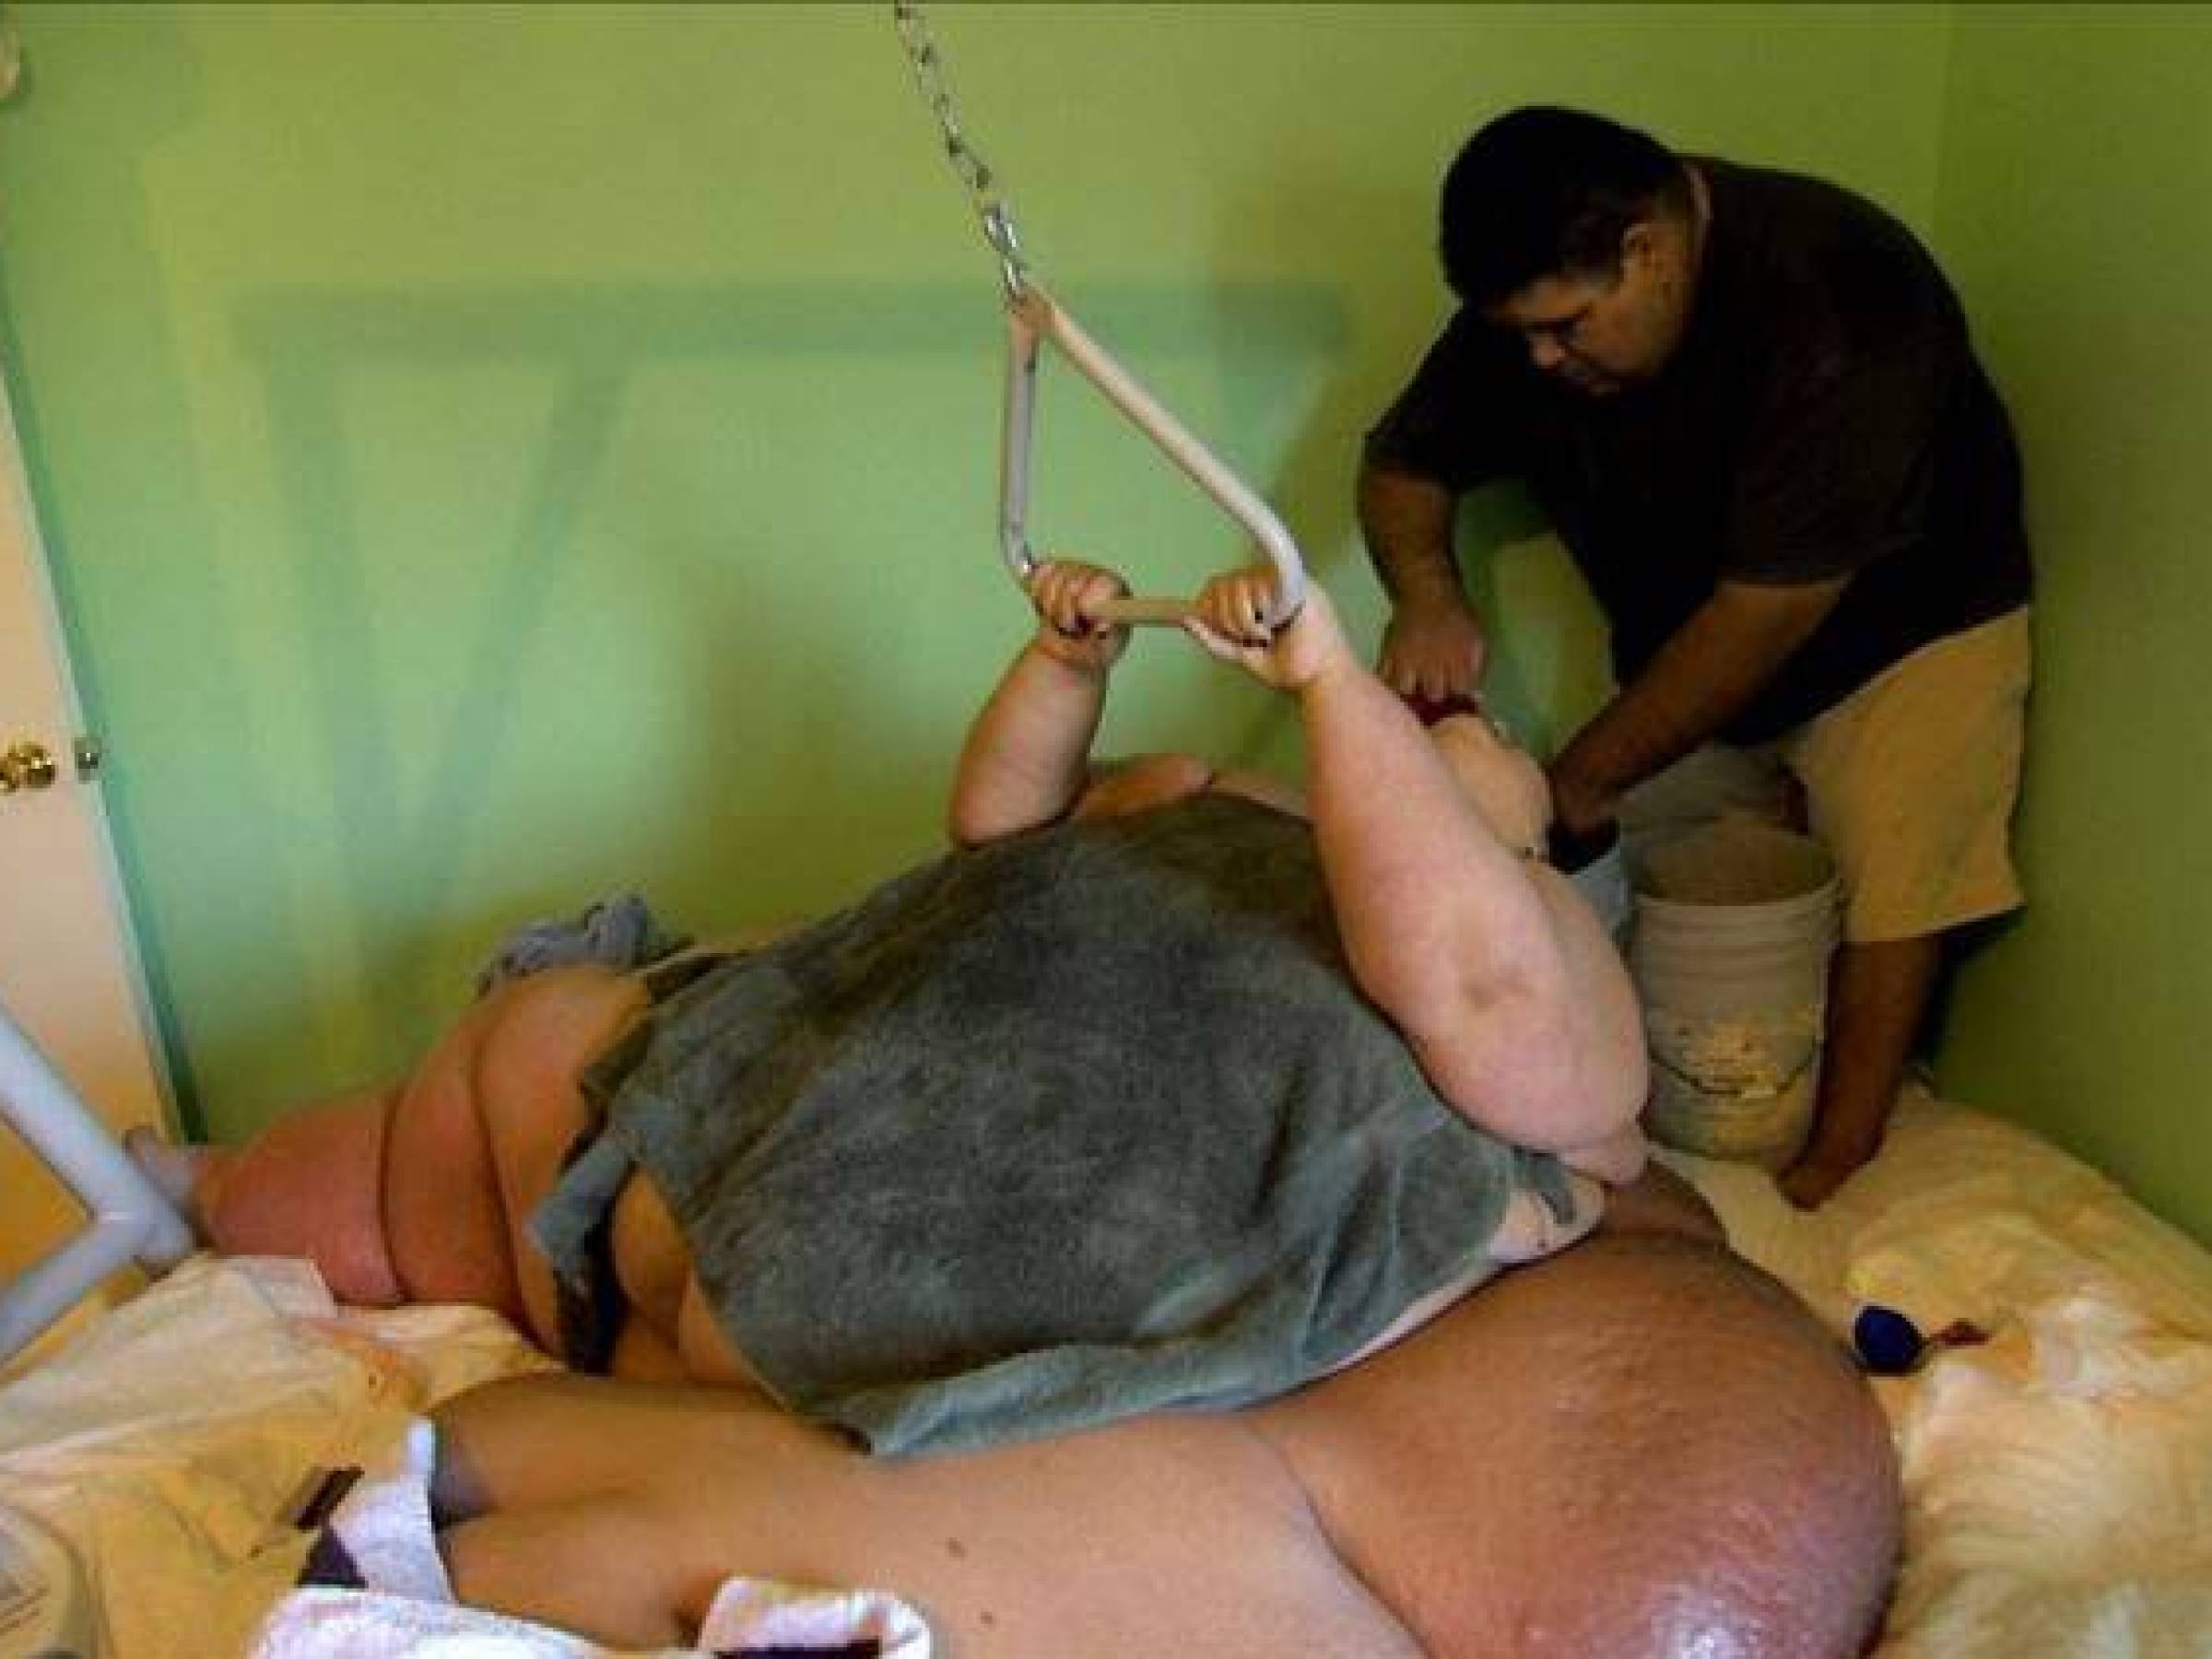 Mayra had no mobility whatsoever. Chains, supporters, hoists, and lifts were used just for basic bathing.